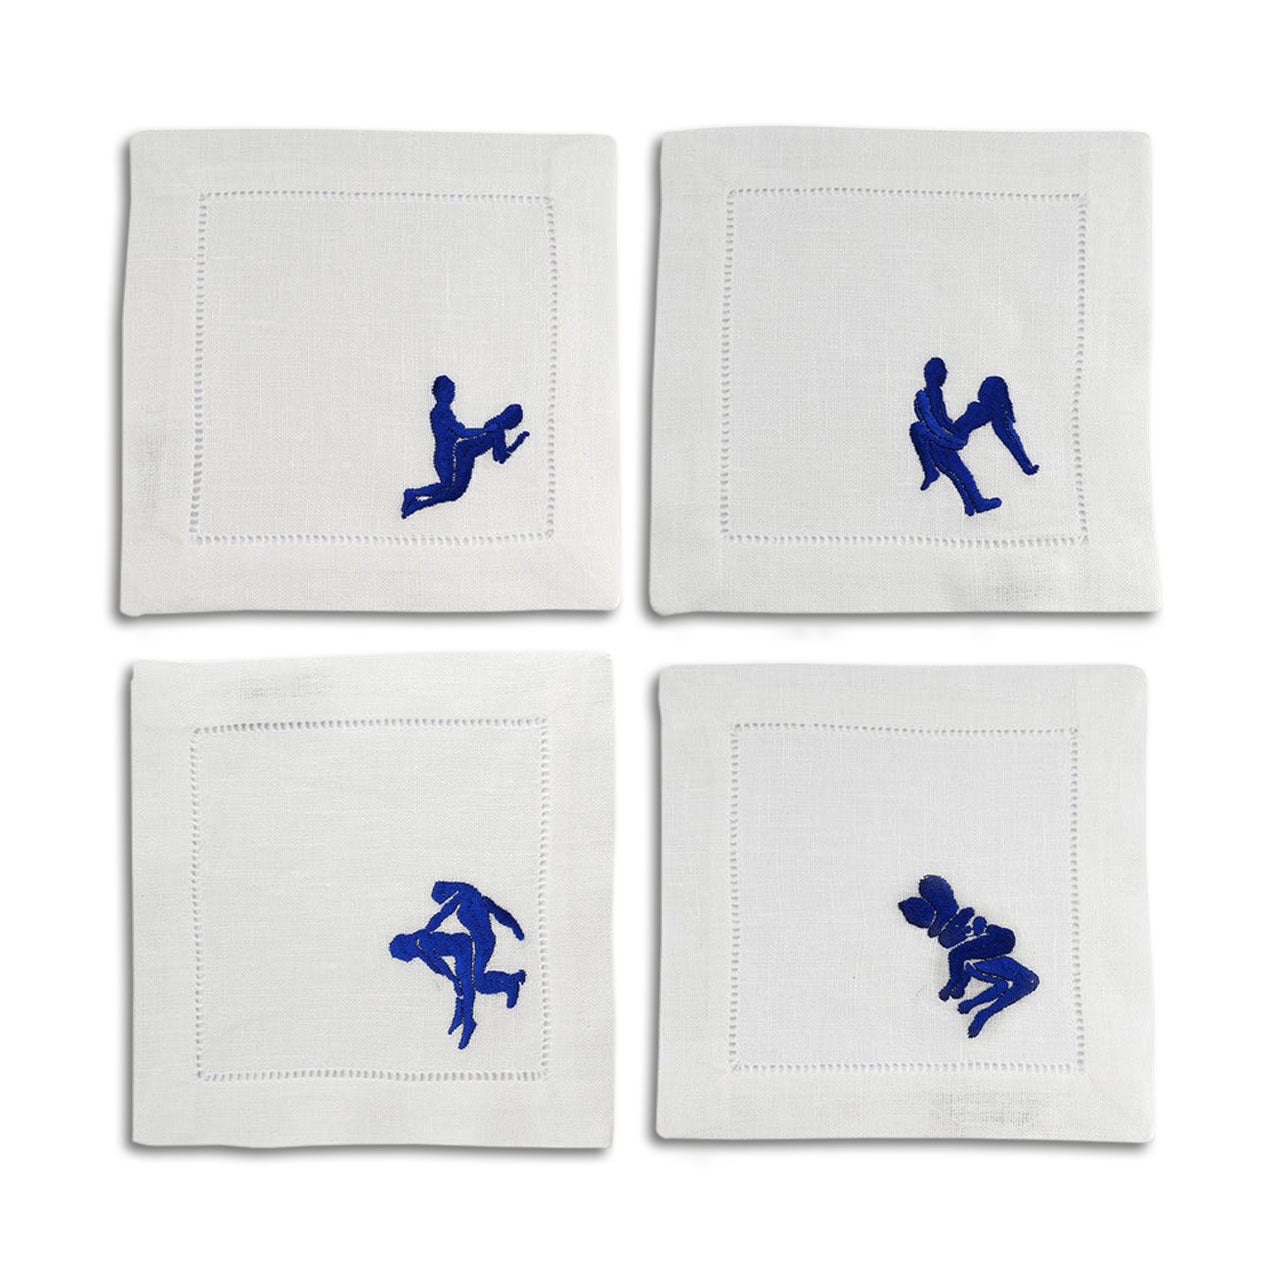 Kama Sutra Cocktail Napkins | Uncrate